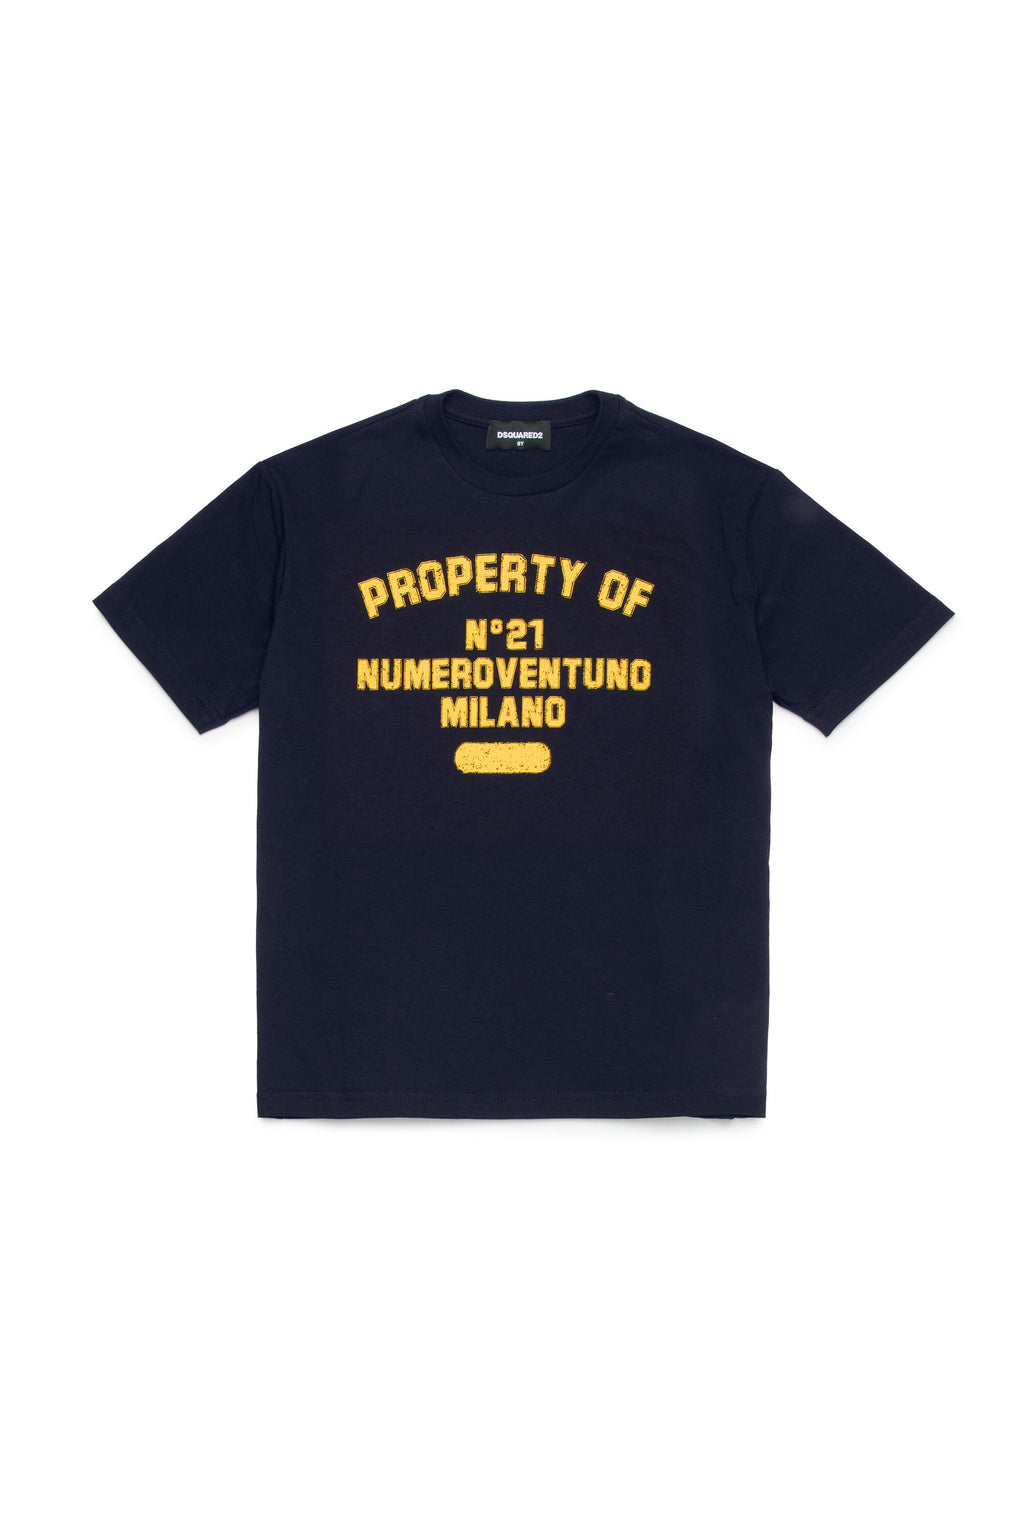 Property of N°21 branded T-shirt